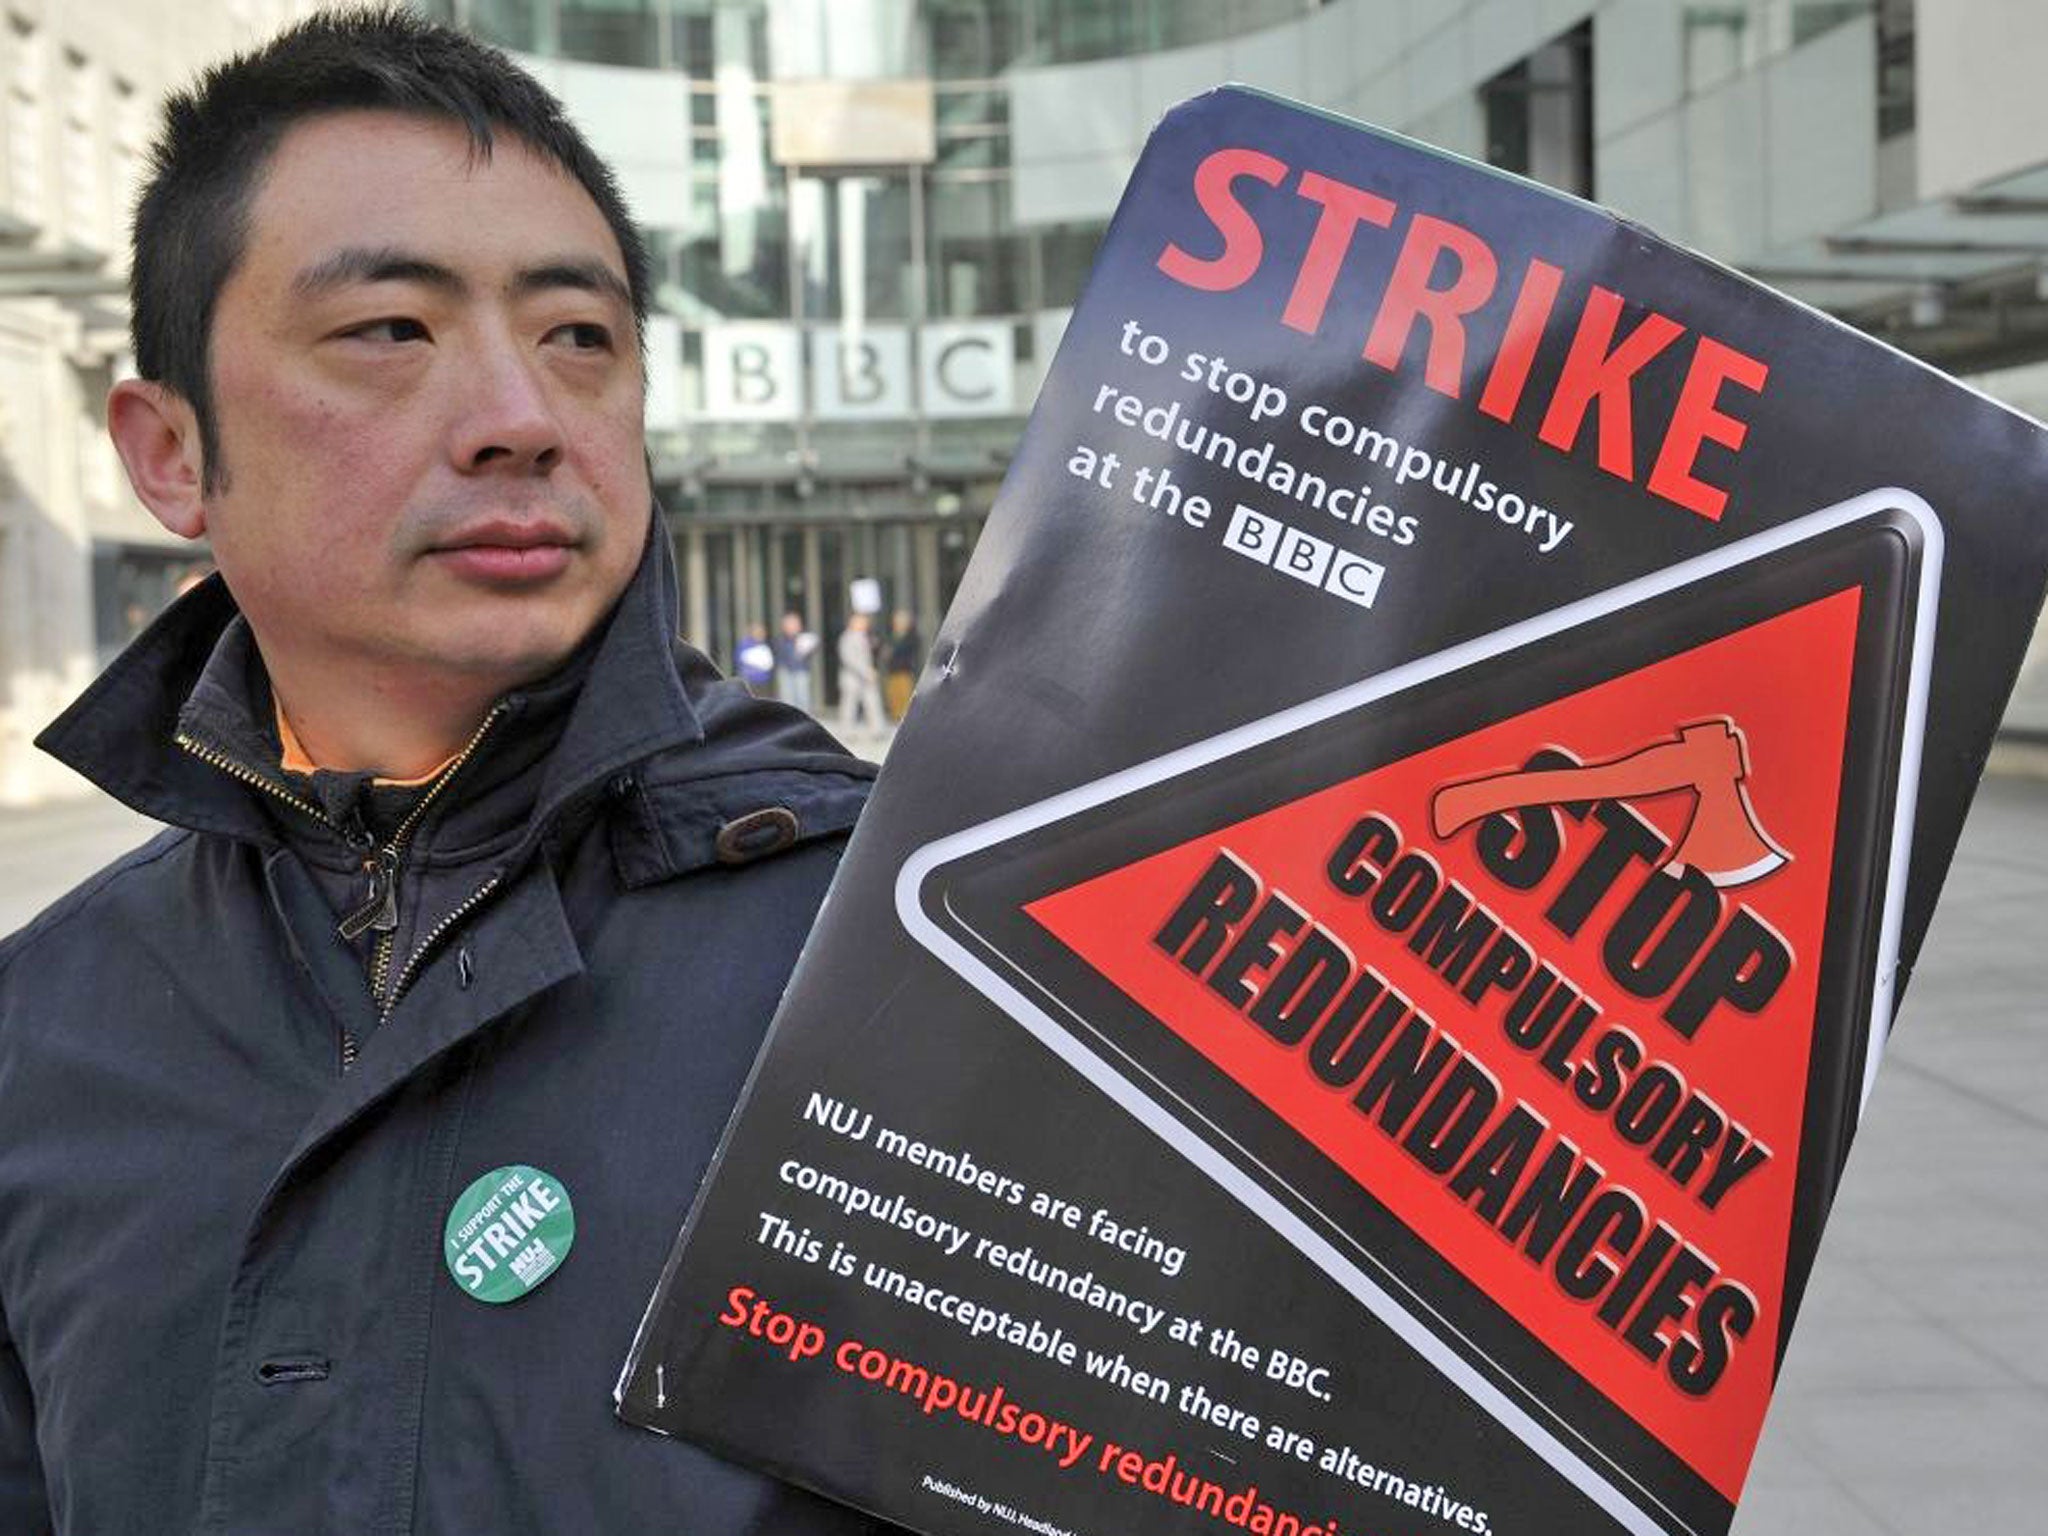 A viewers’ survival guide during the BBC strike